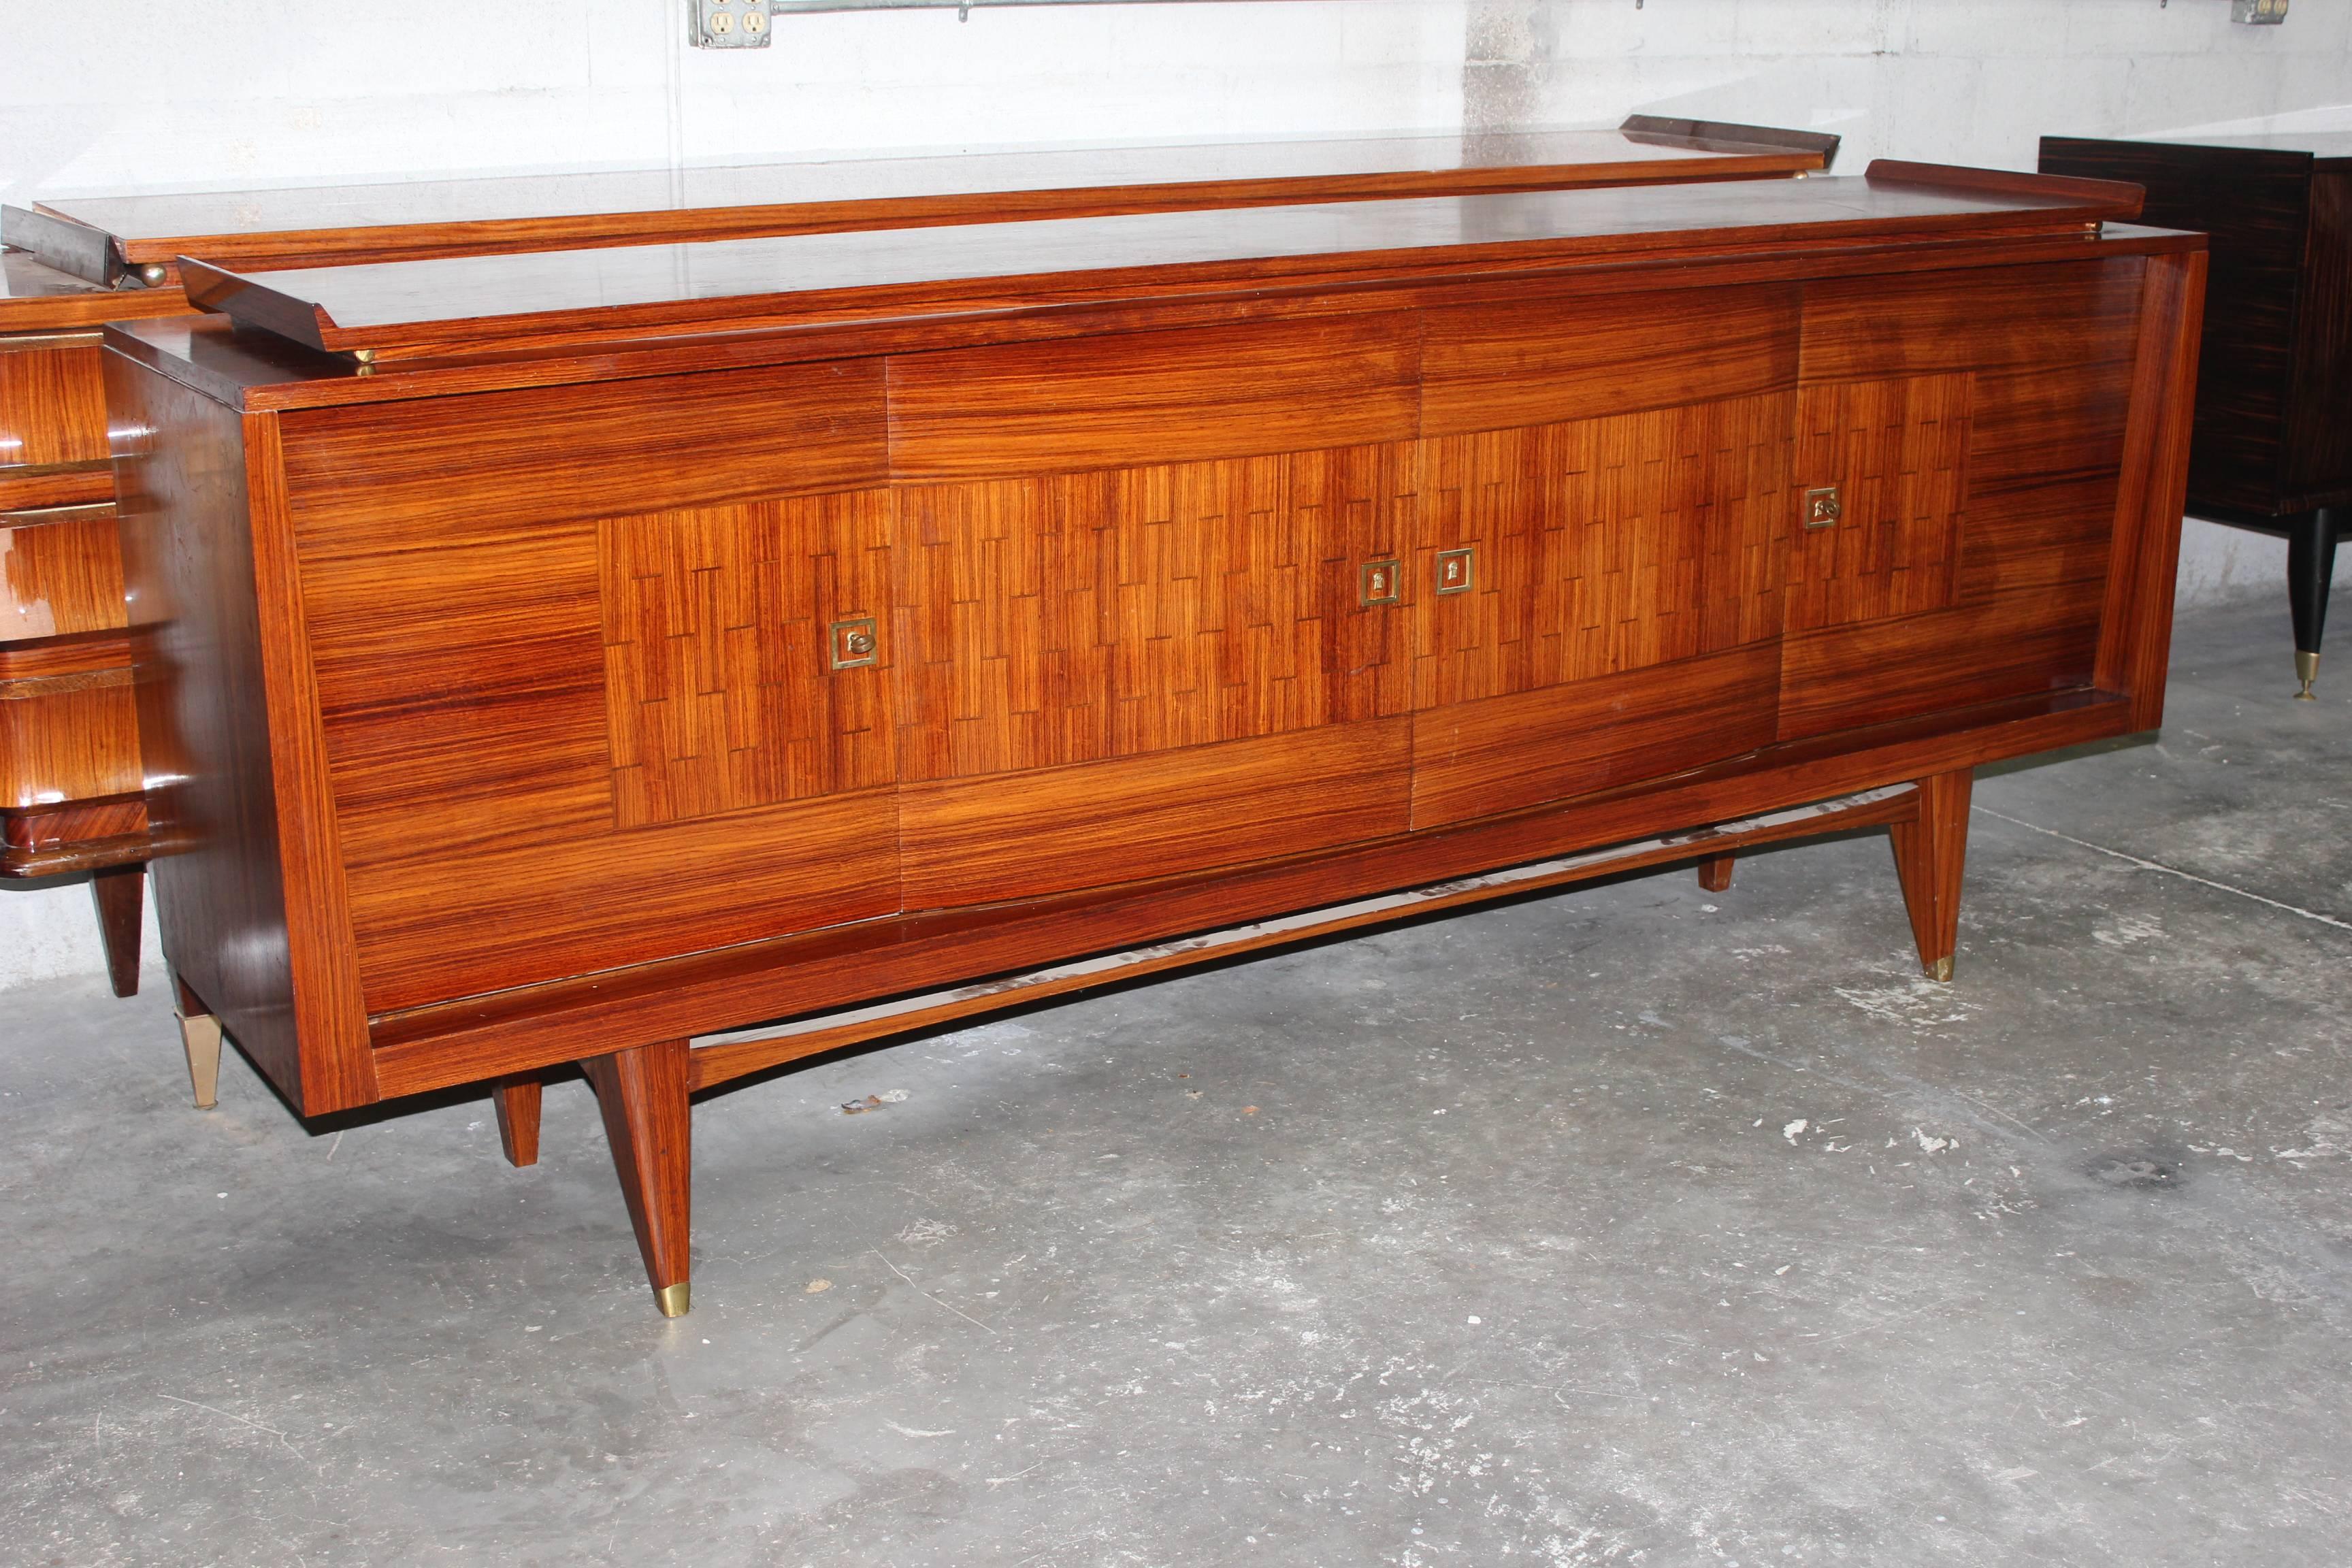 French Art Deco Sideboard / Buffet palisander, circa 1940s. high gloss finish and Finished interior.